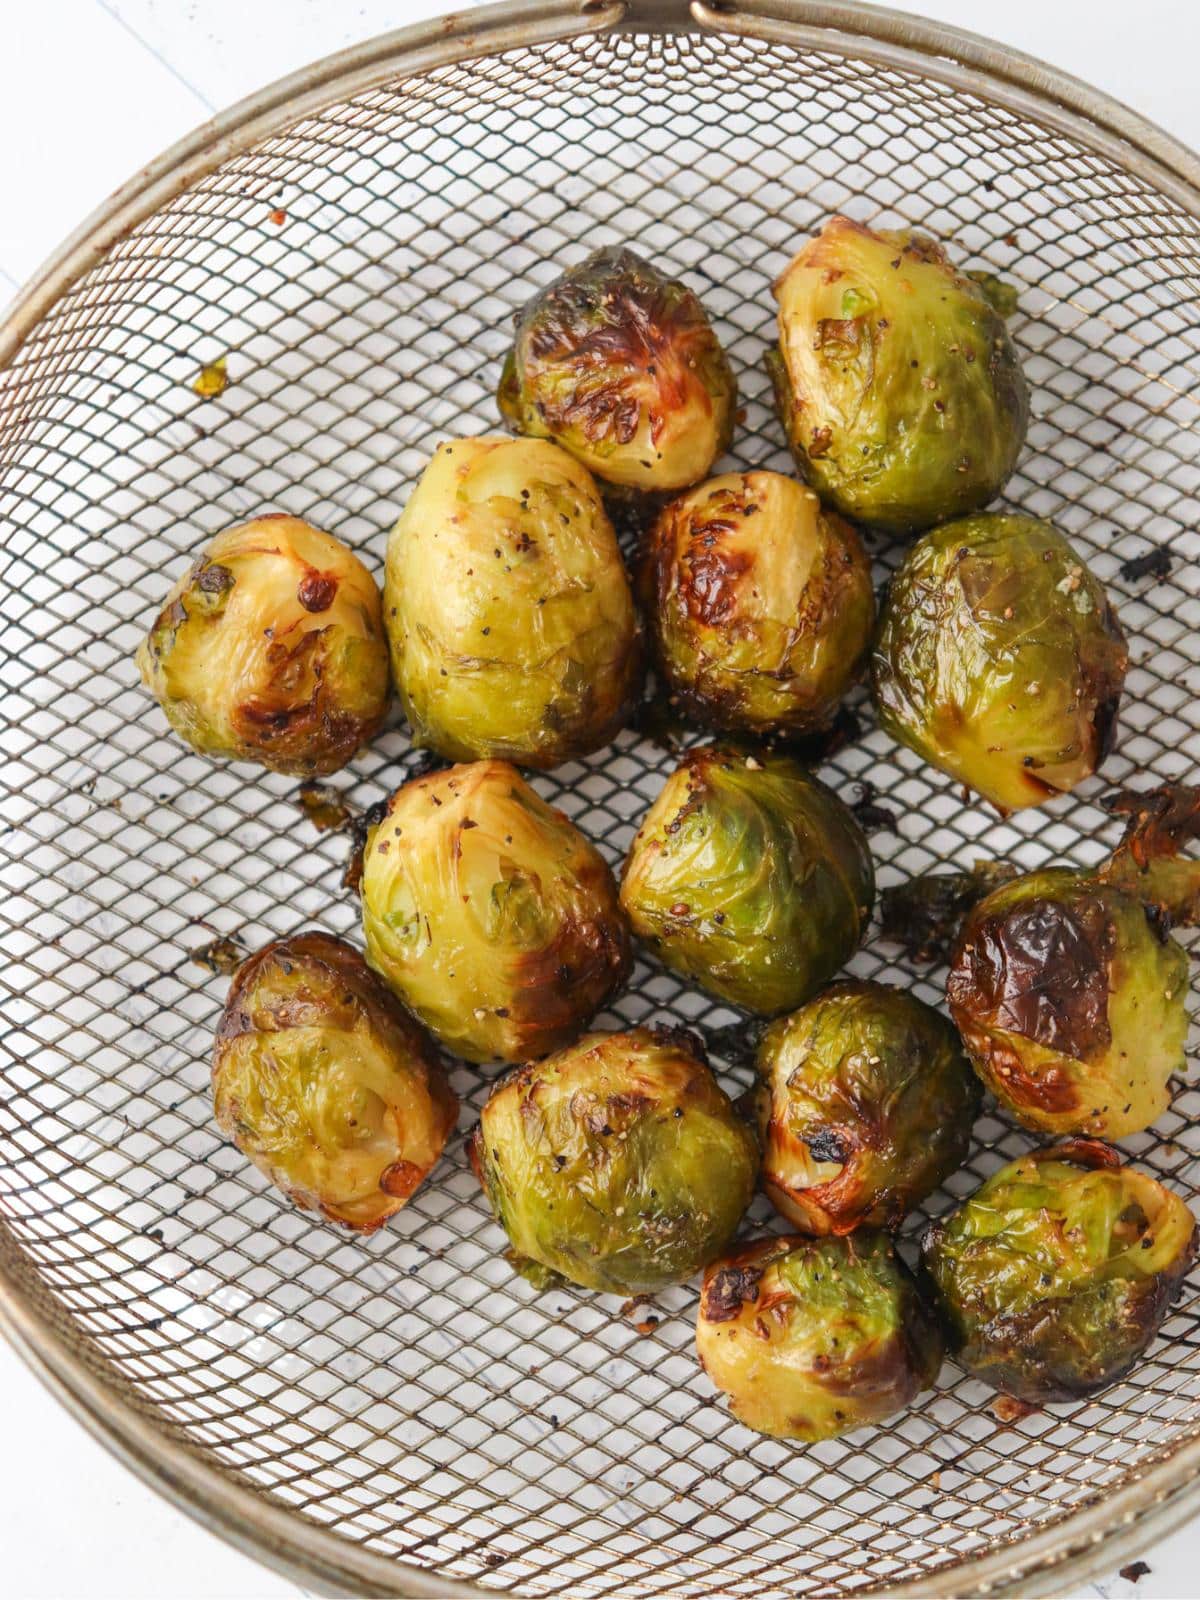 Frozen brussels sprouts in an air fryer basket, after being air fried.